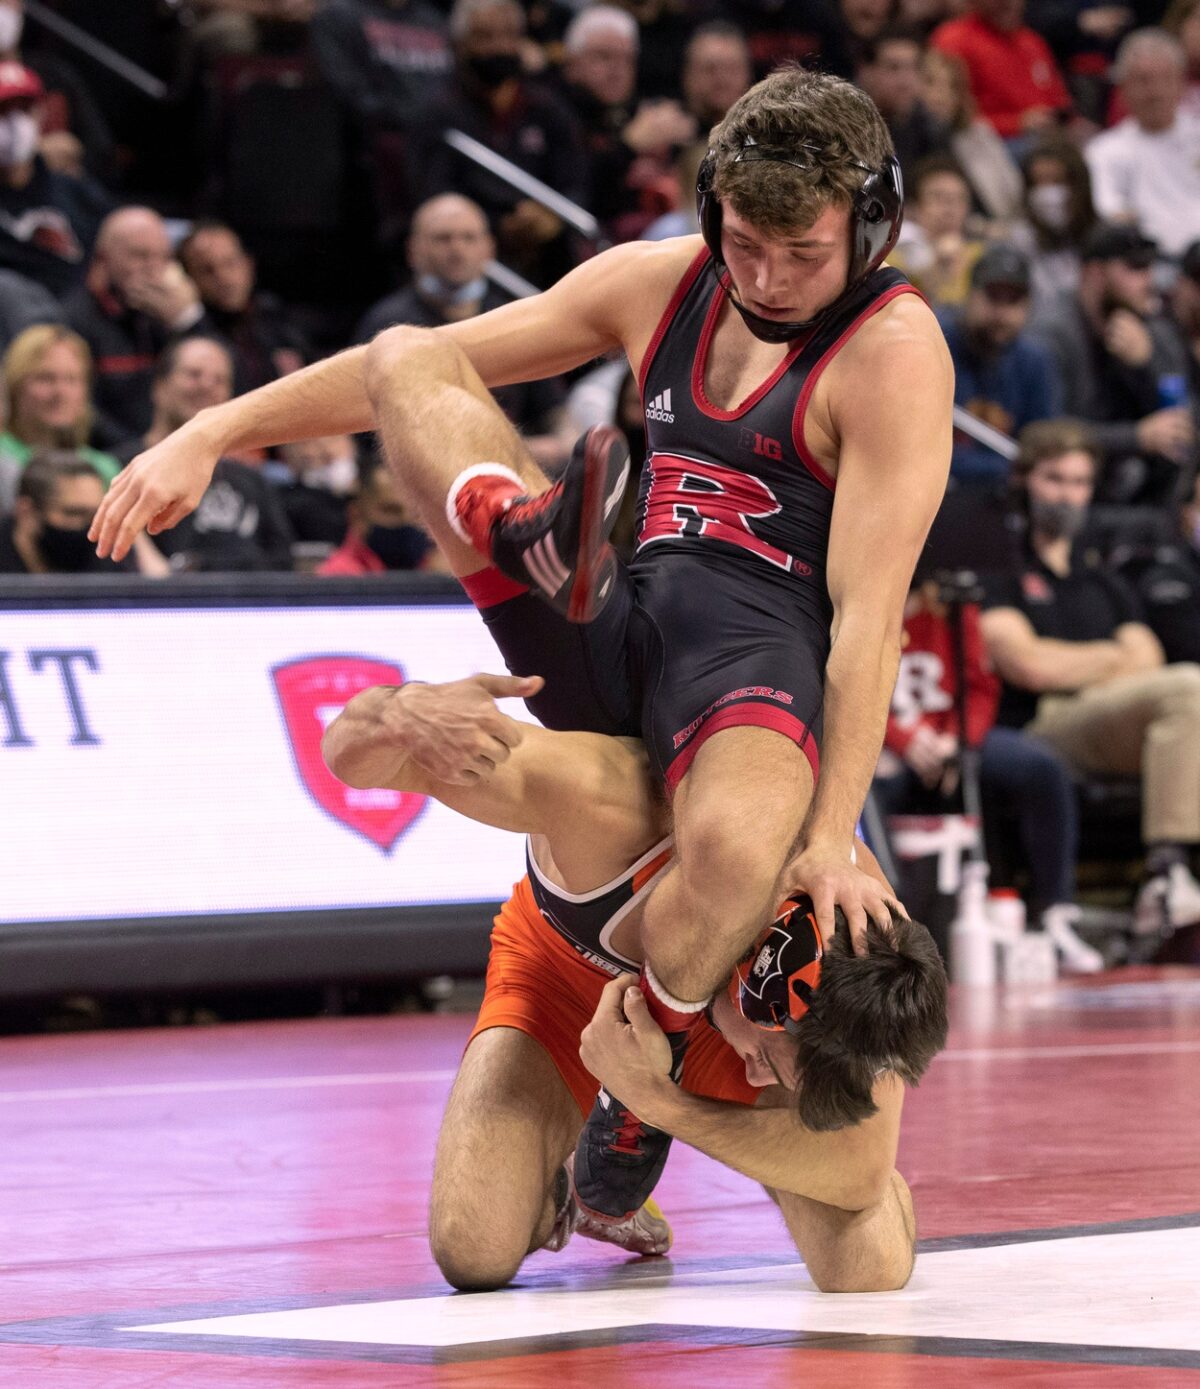 Rutgers wrestling’s Scott Goodale praises in-form Dylan Shawver: ‘He’s a gangster…He loves to compete’